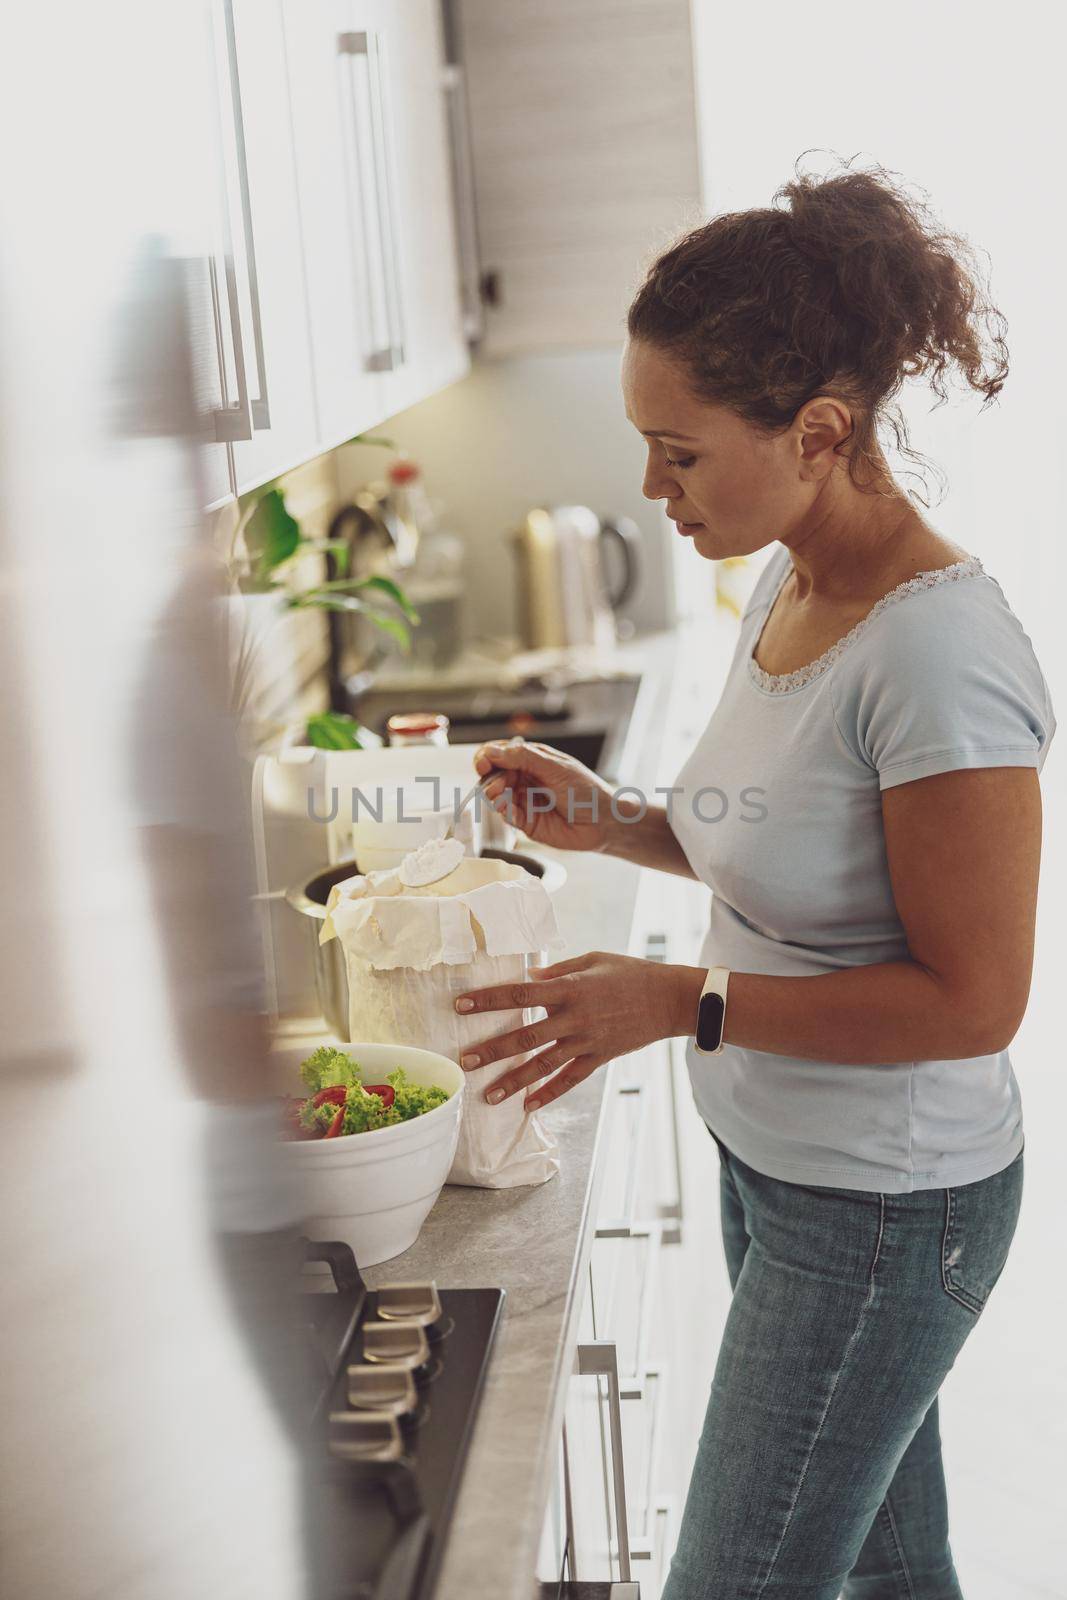 Cooking in the kitchen. A woman with a spoonful of flour in her hand prepares a dough